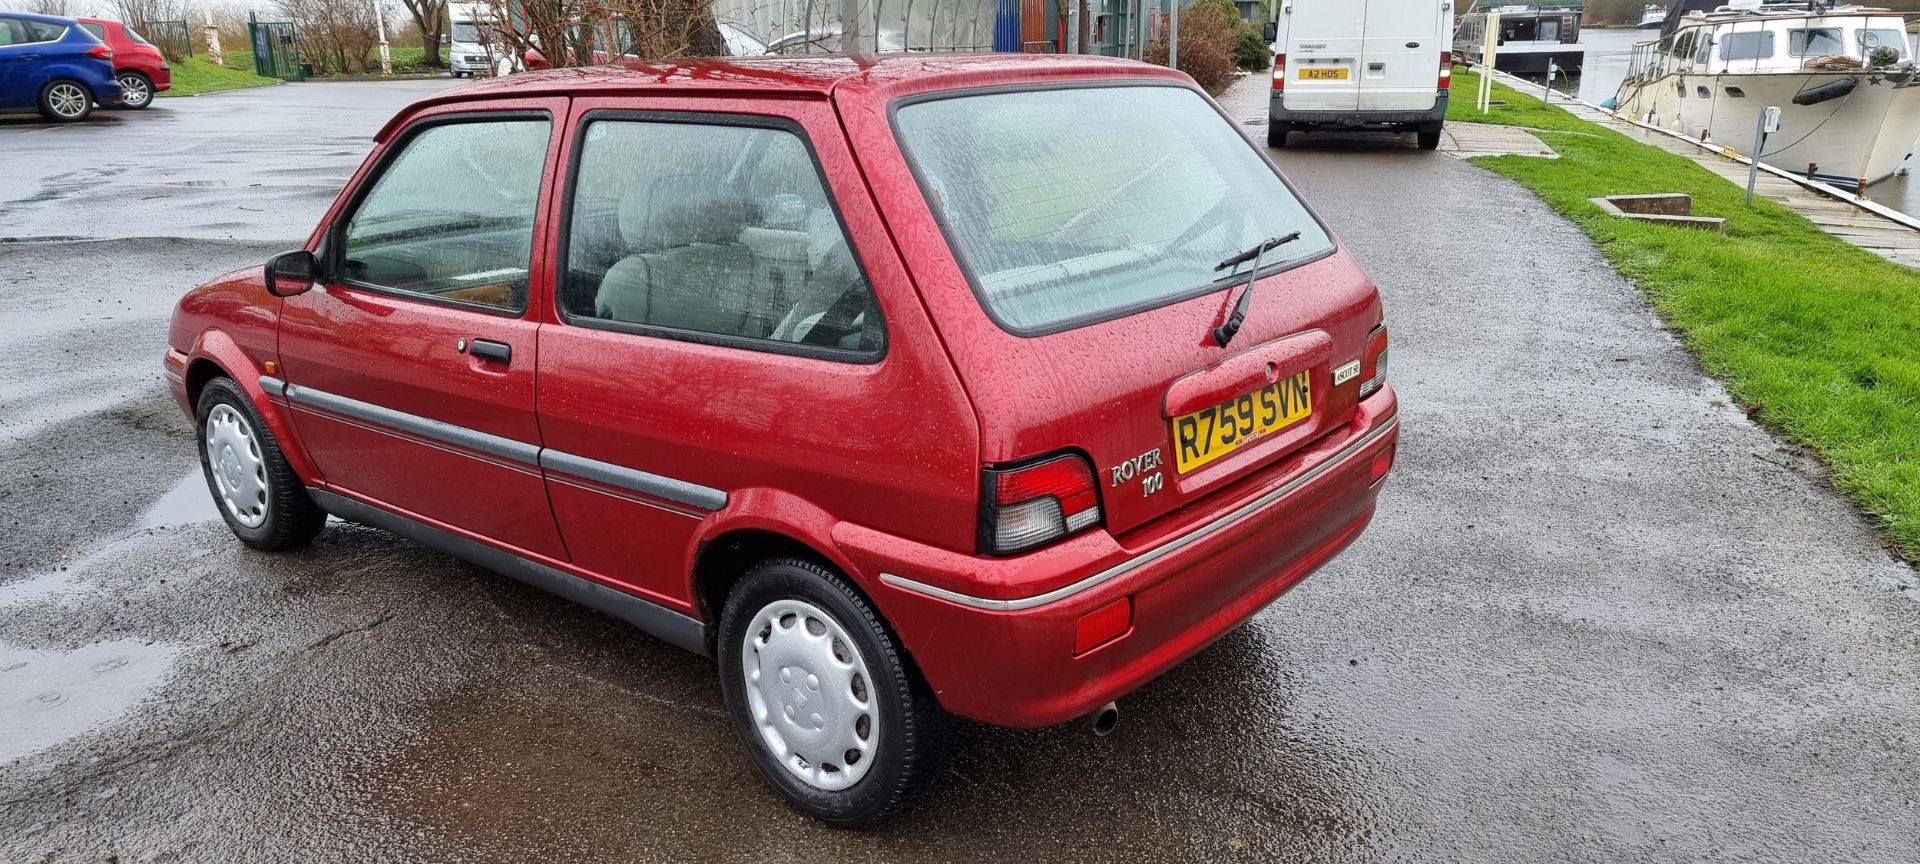 1998 Rover Metro 100 Ascot SE diesel, 1,527cc. Registration number R759 SVN. Chassis number - Image 5 of 13